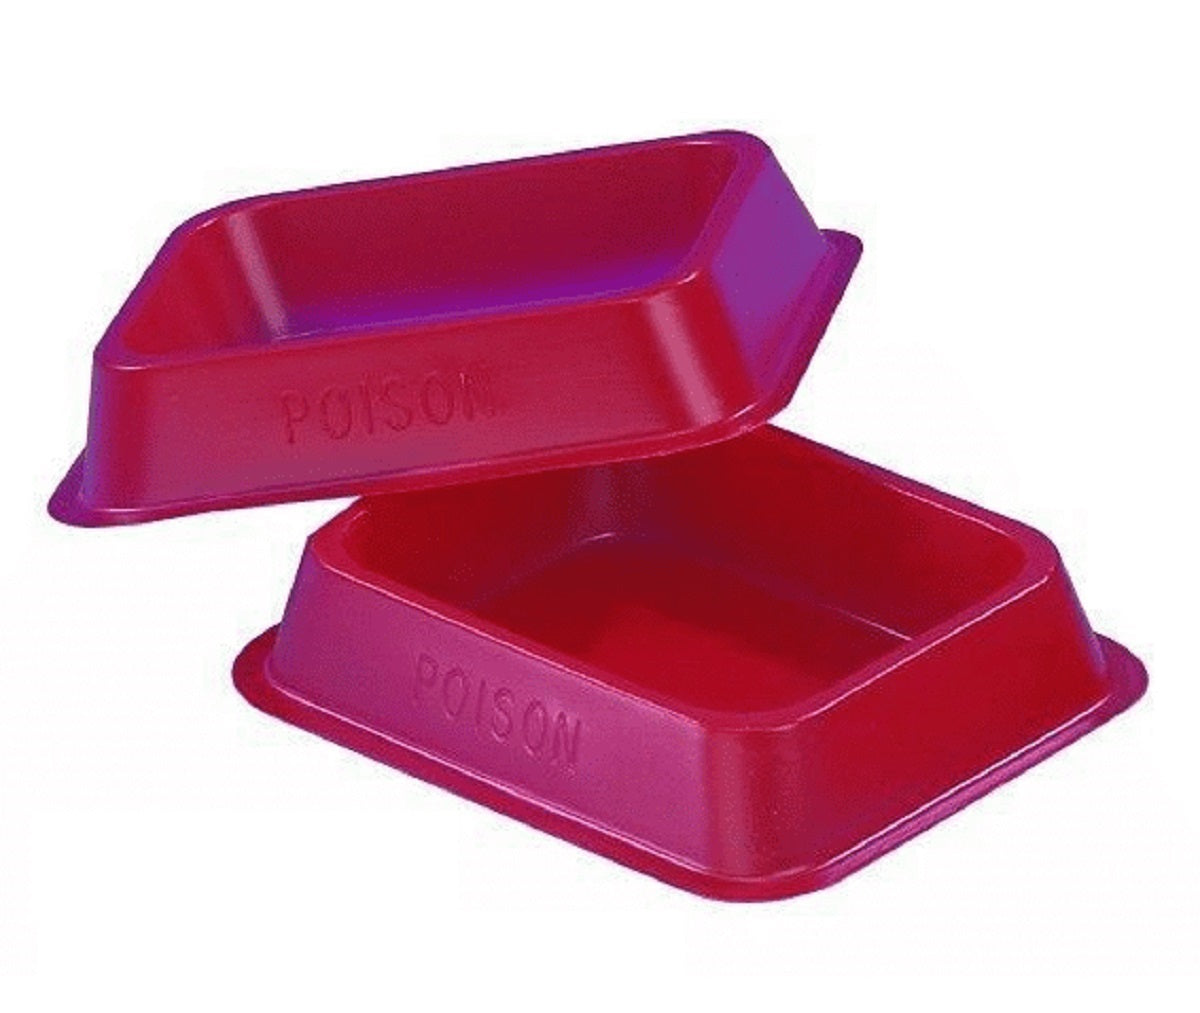 RAT MOUSE BAIT TRAYS FOR USE WITH MOUSE OR RAT POISON TRAY BAIT STATION TRAY (Pack of 100) - Moth Control